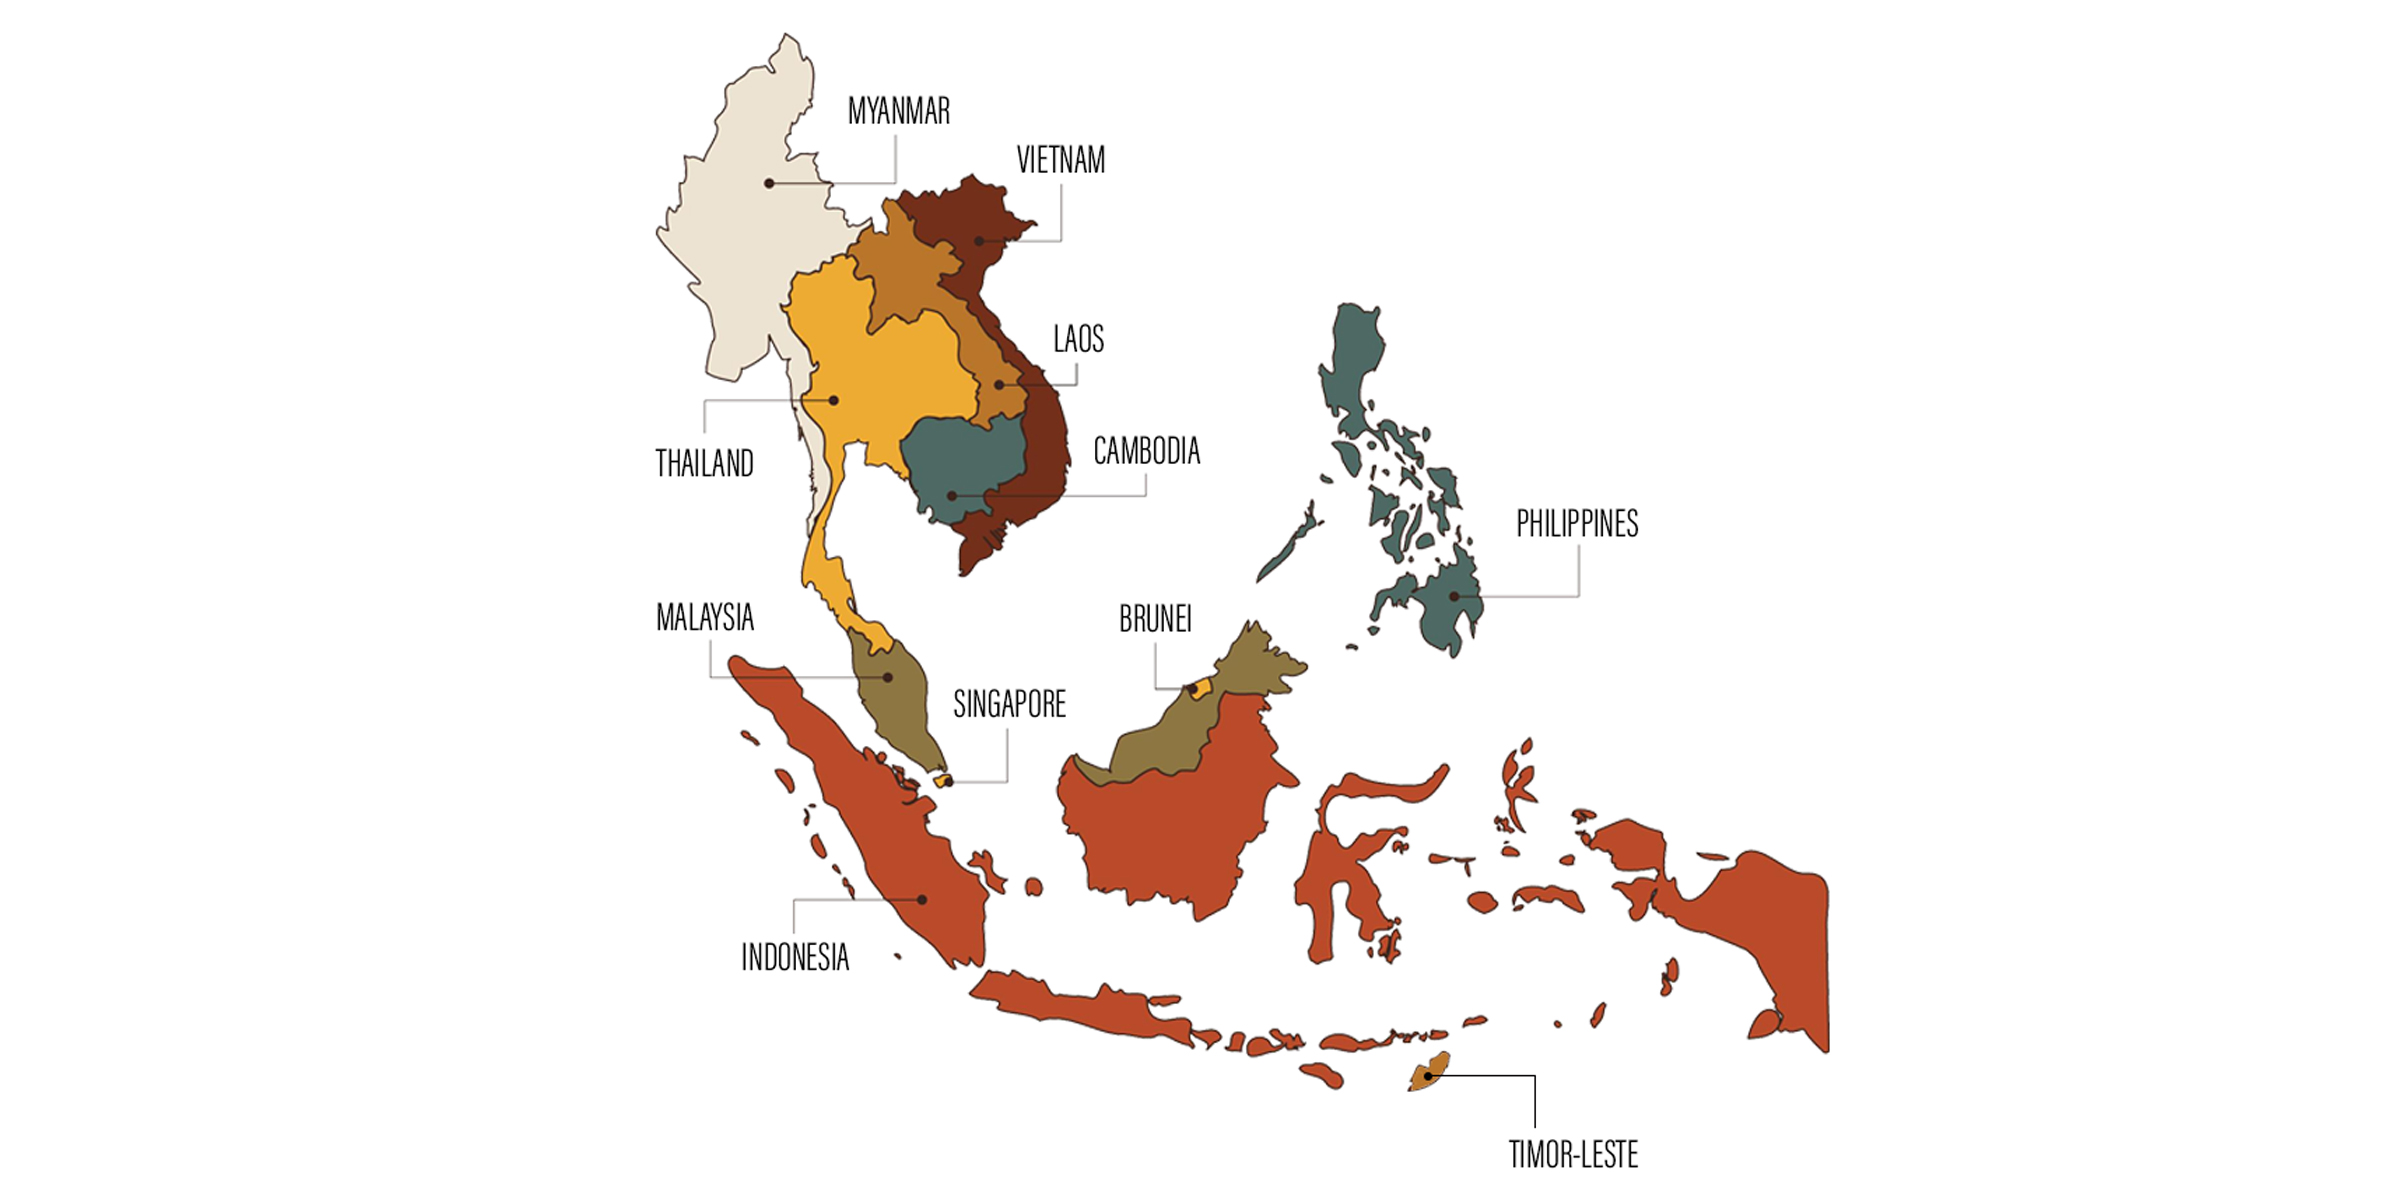 11 countries in South East Asia and distinctive features